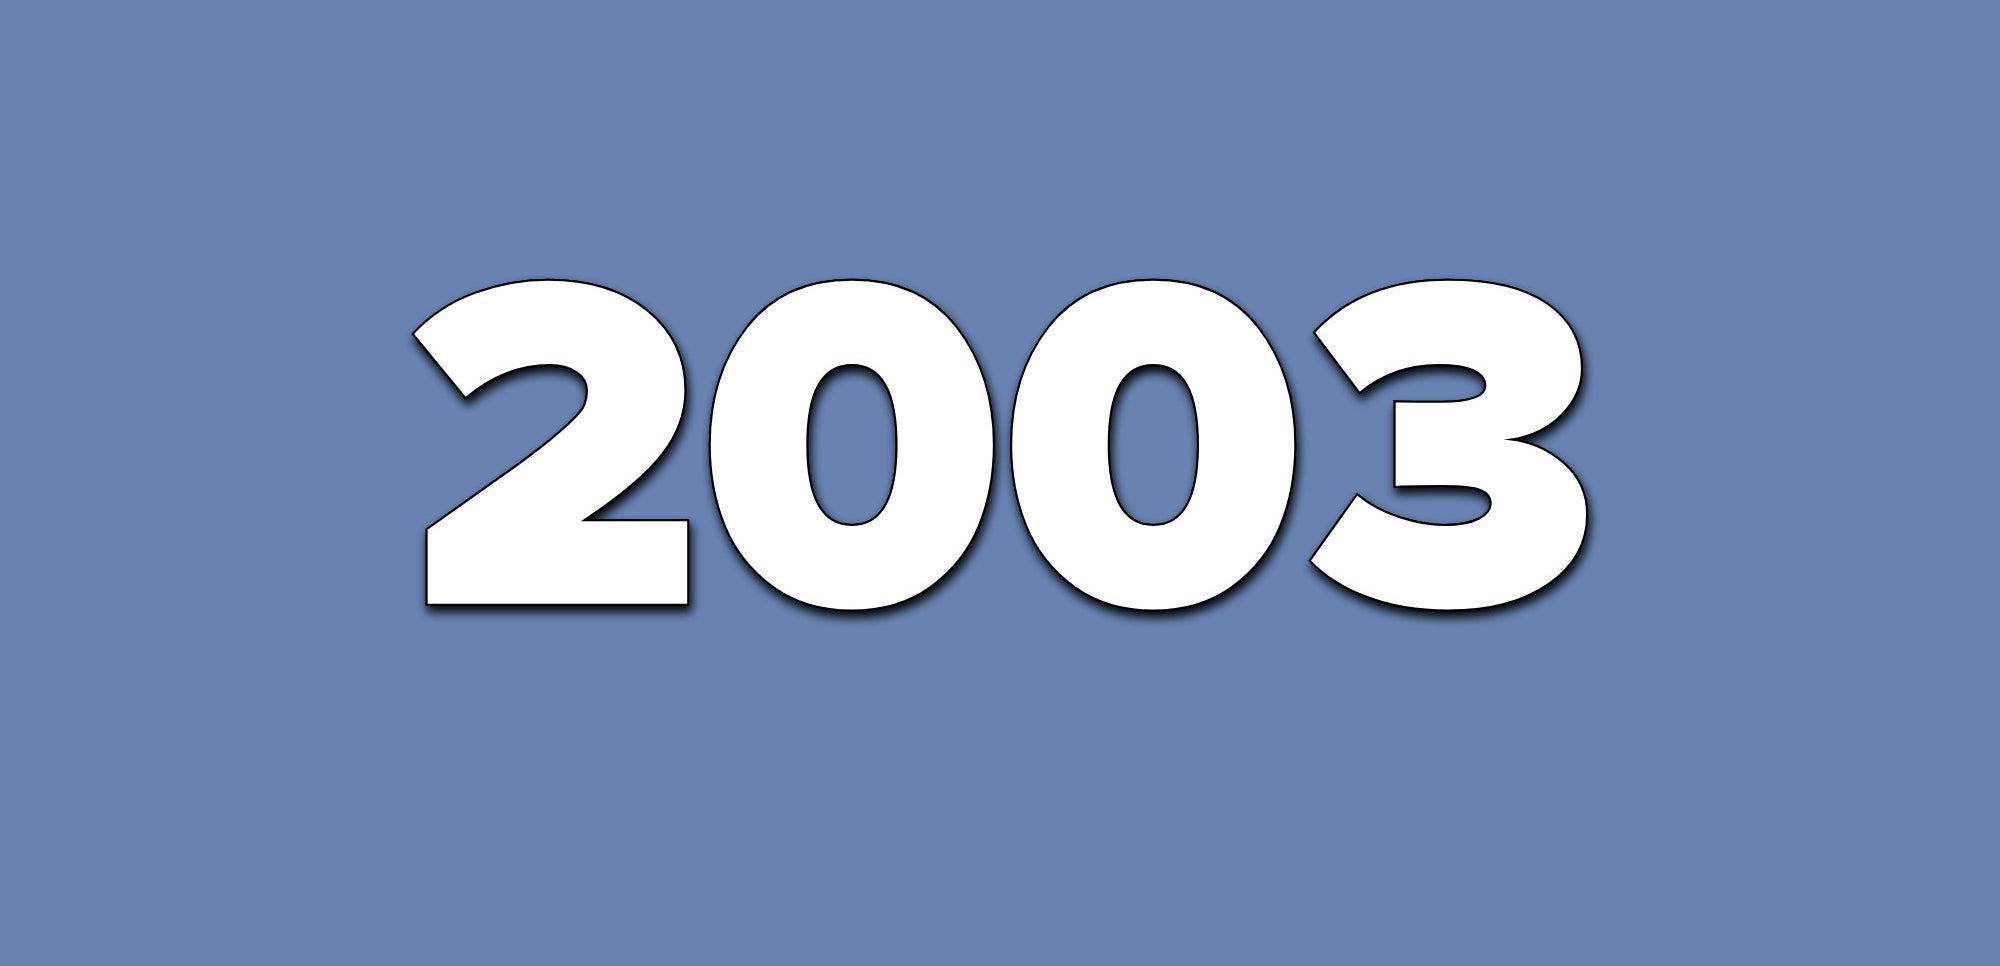 A blue background with text that says 2003